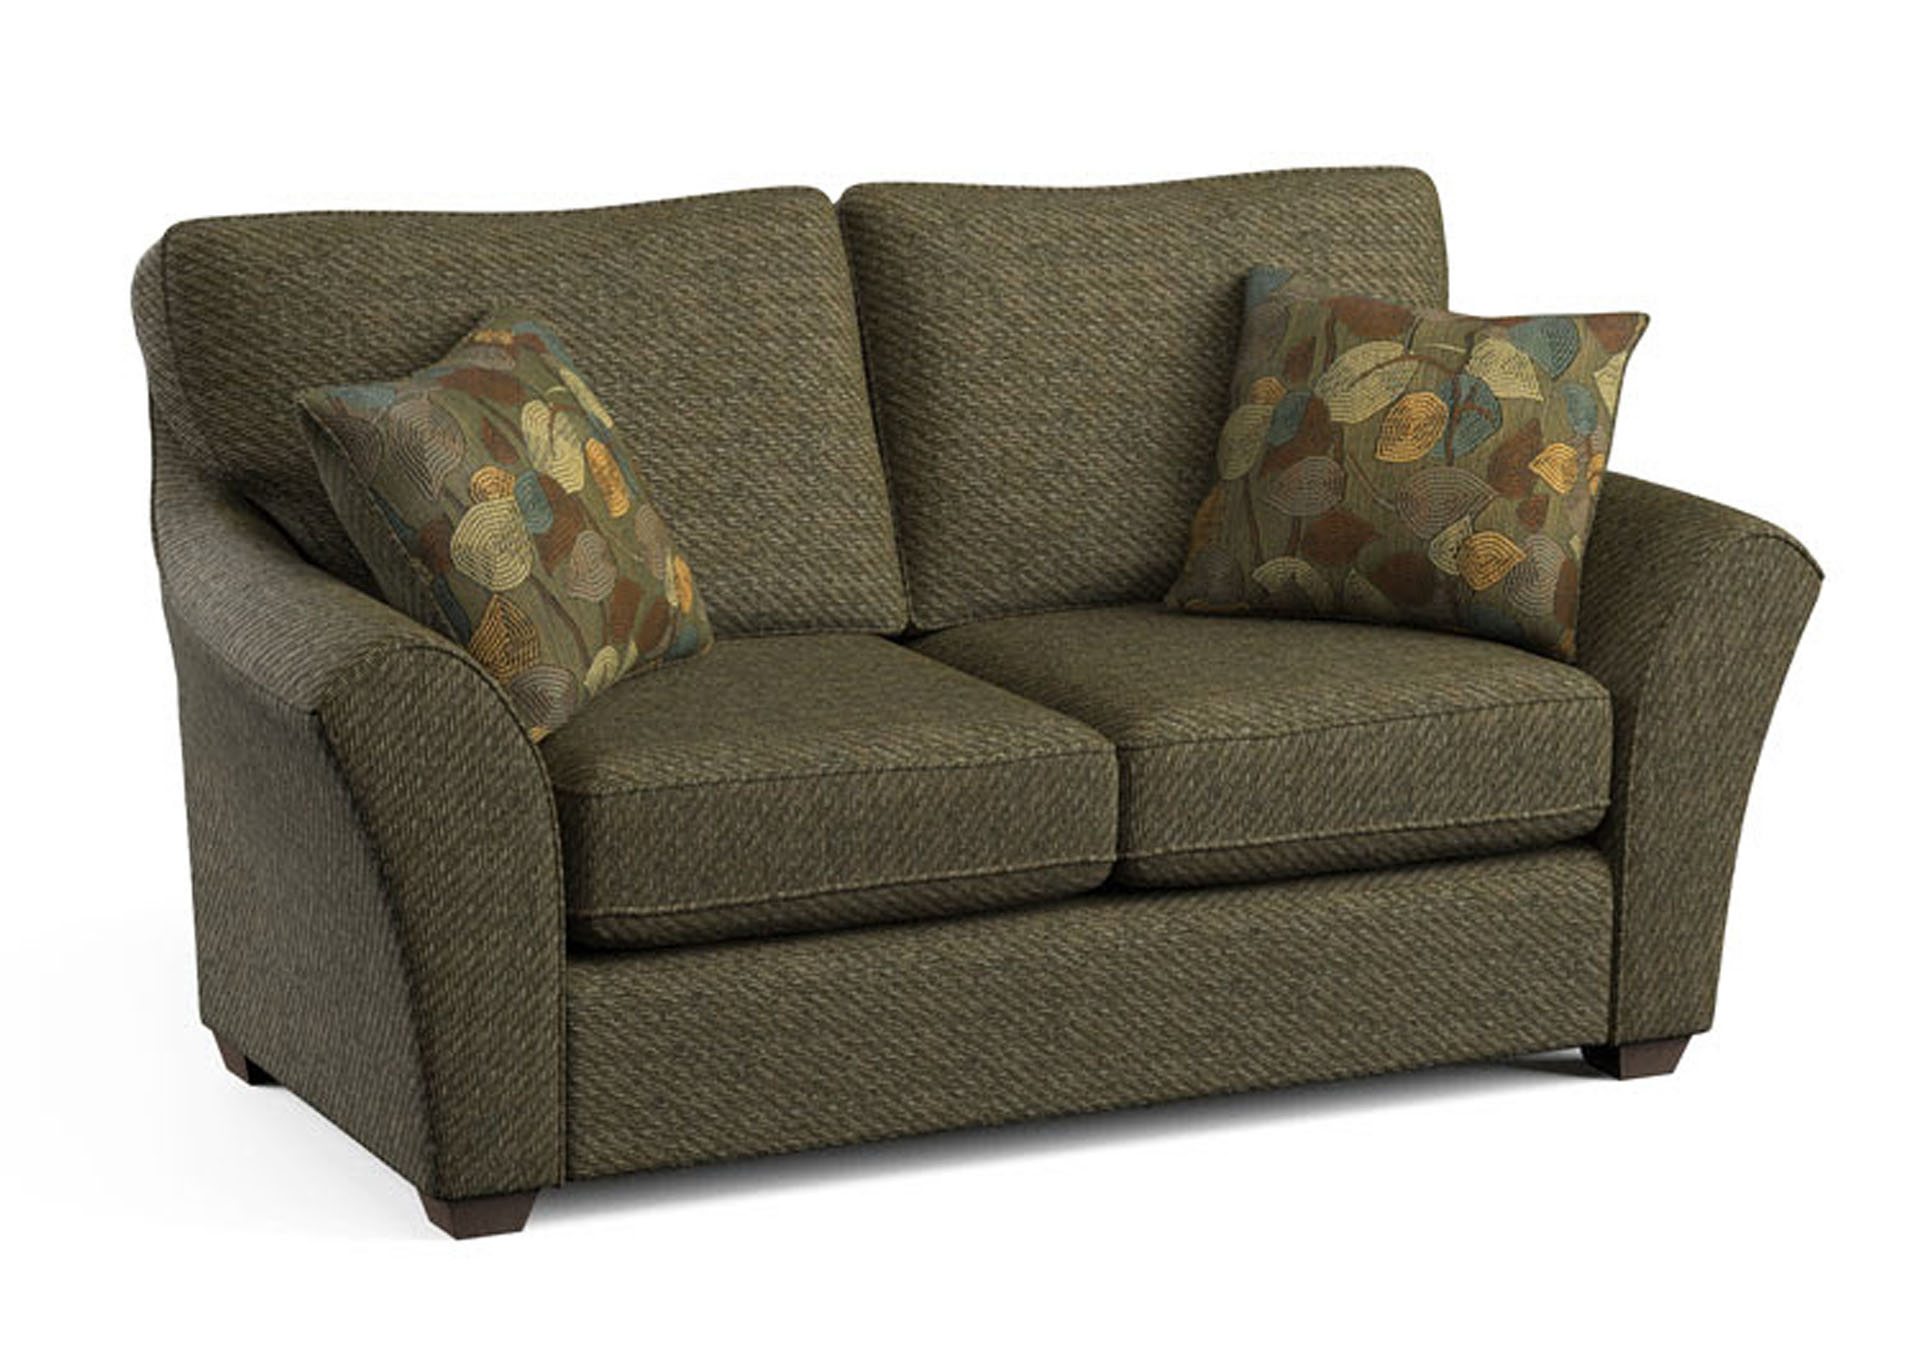 Value Selection Loveseat w/ 2 Pillows,Stanton